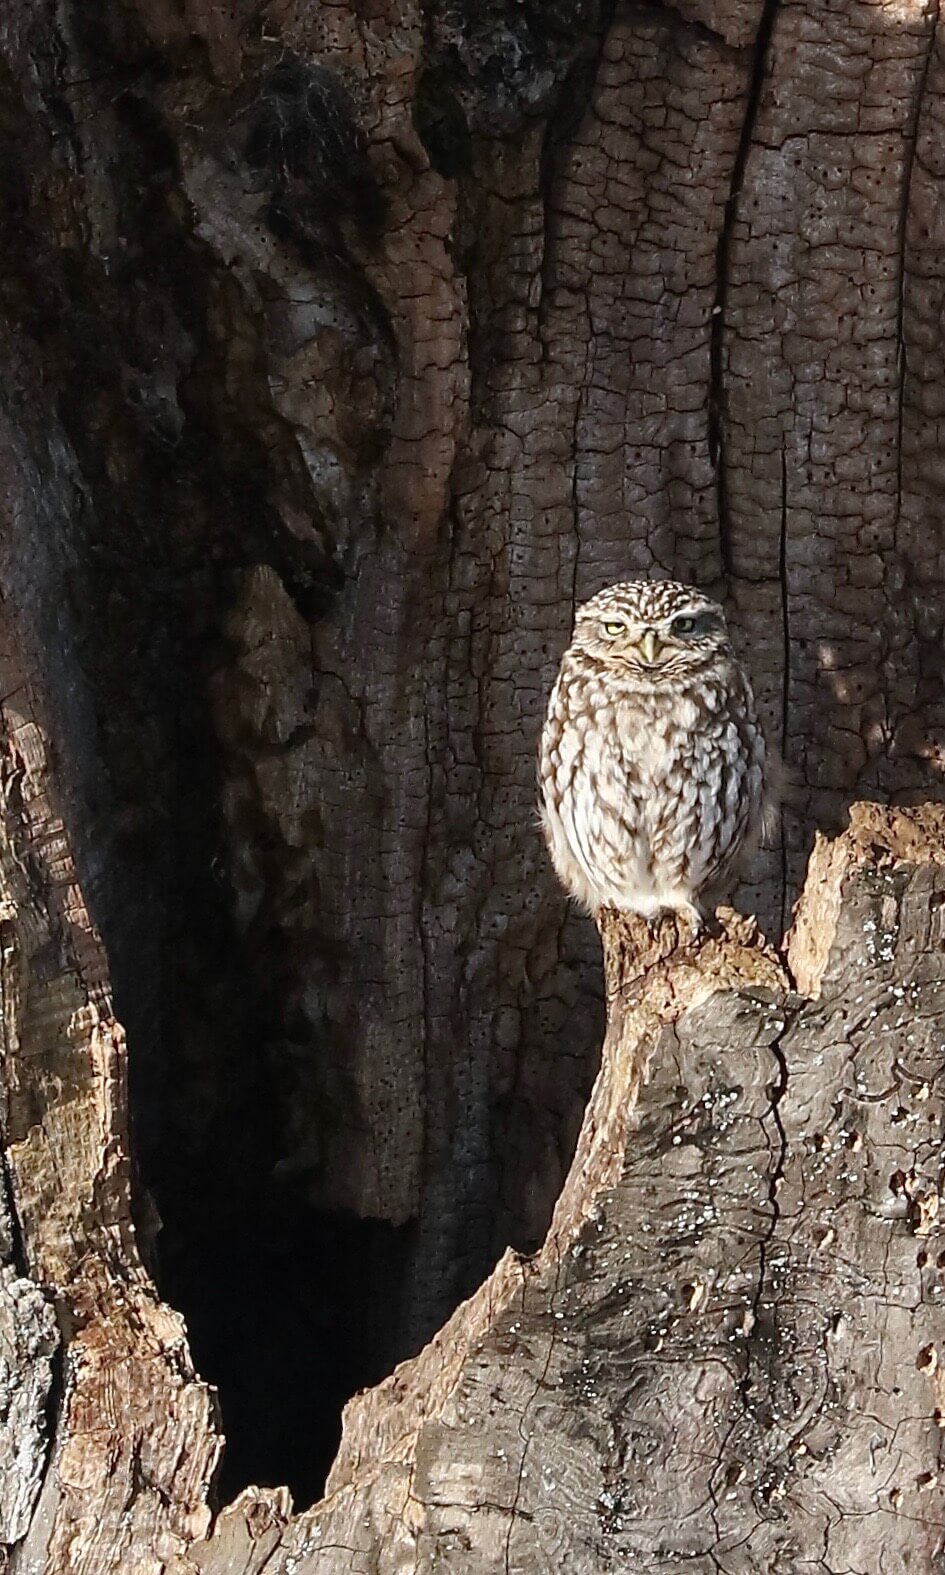 small owl in tree trunk